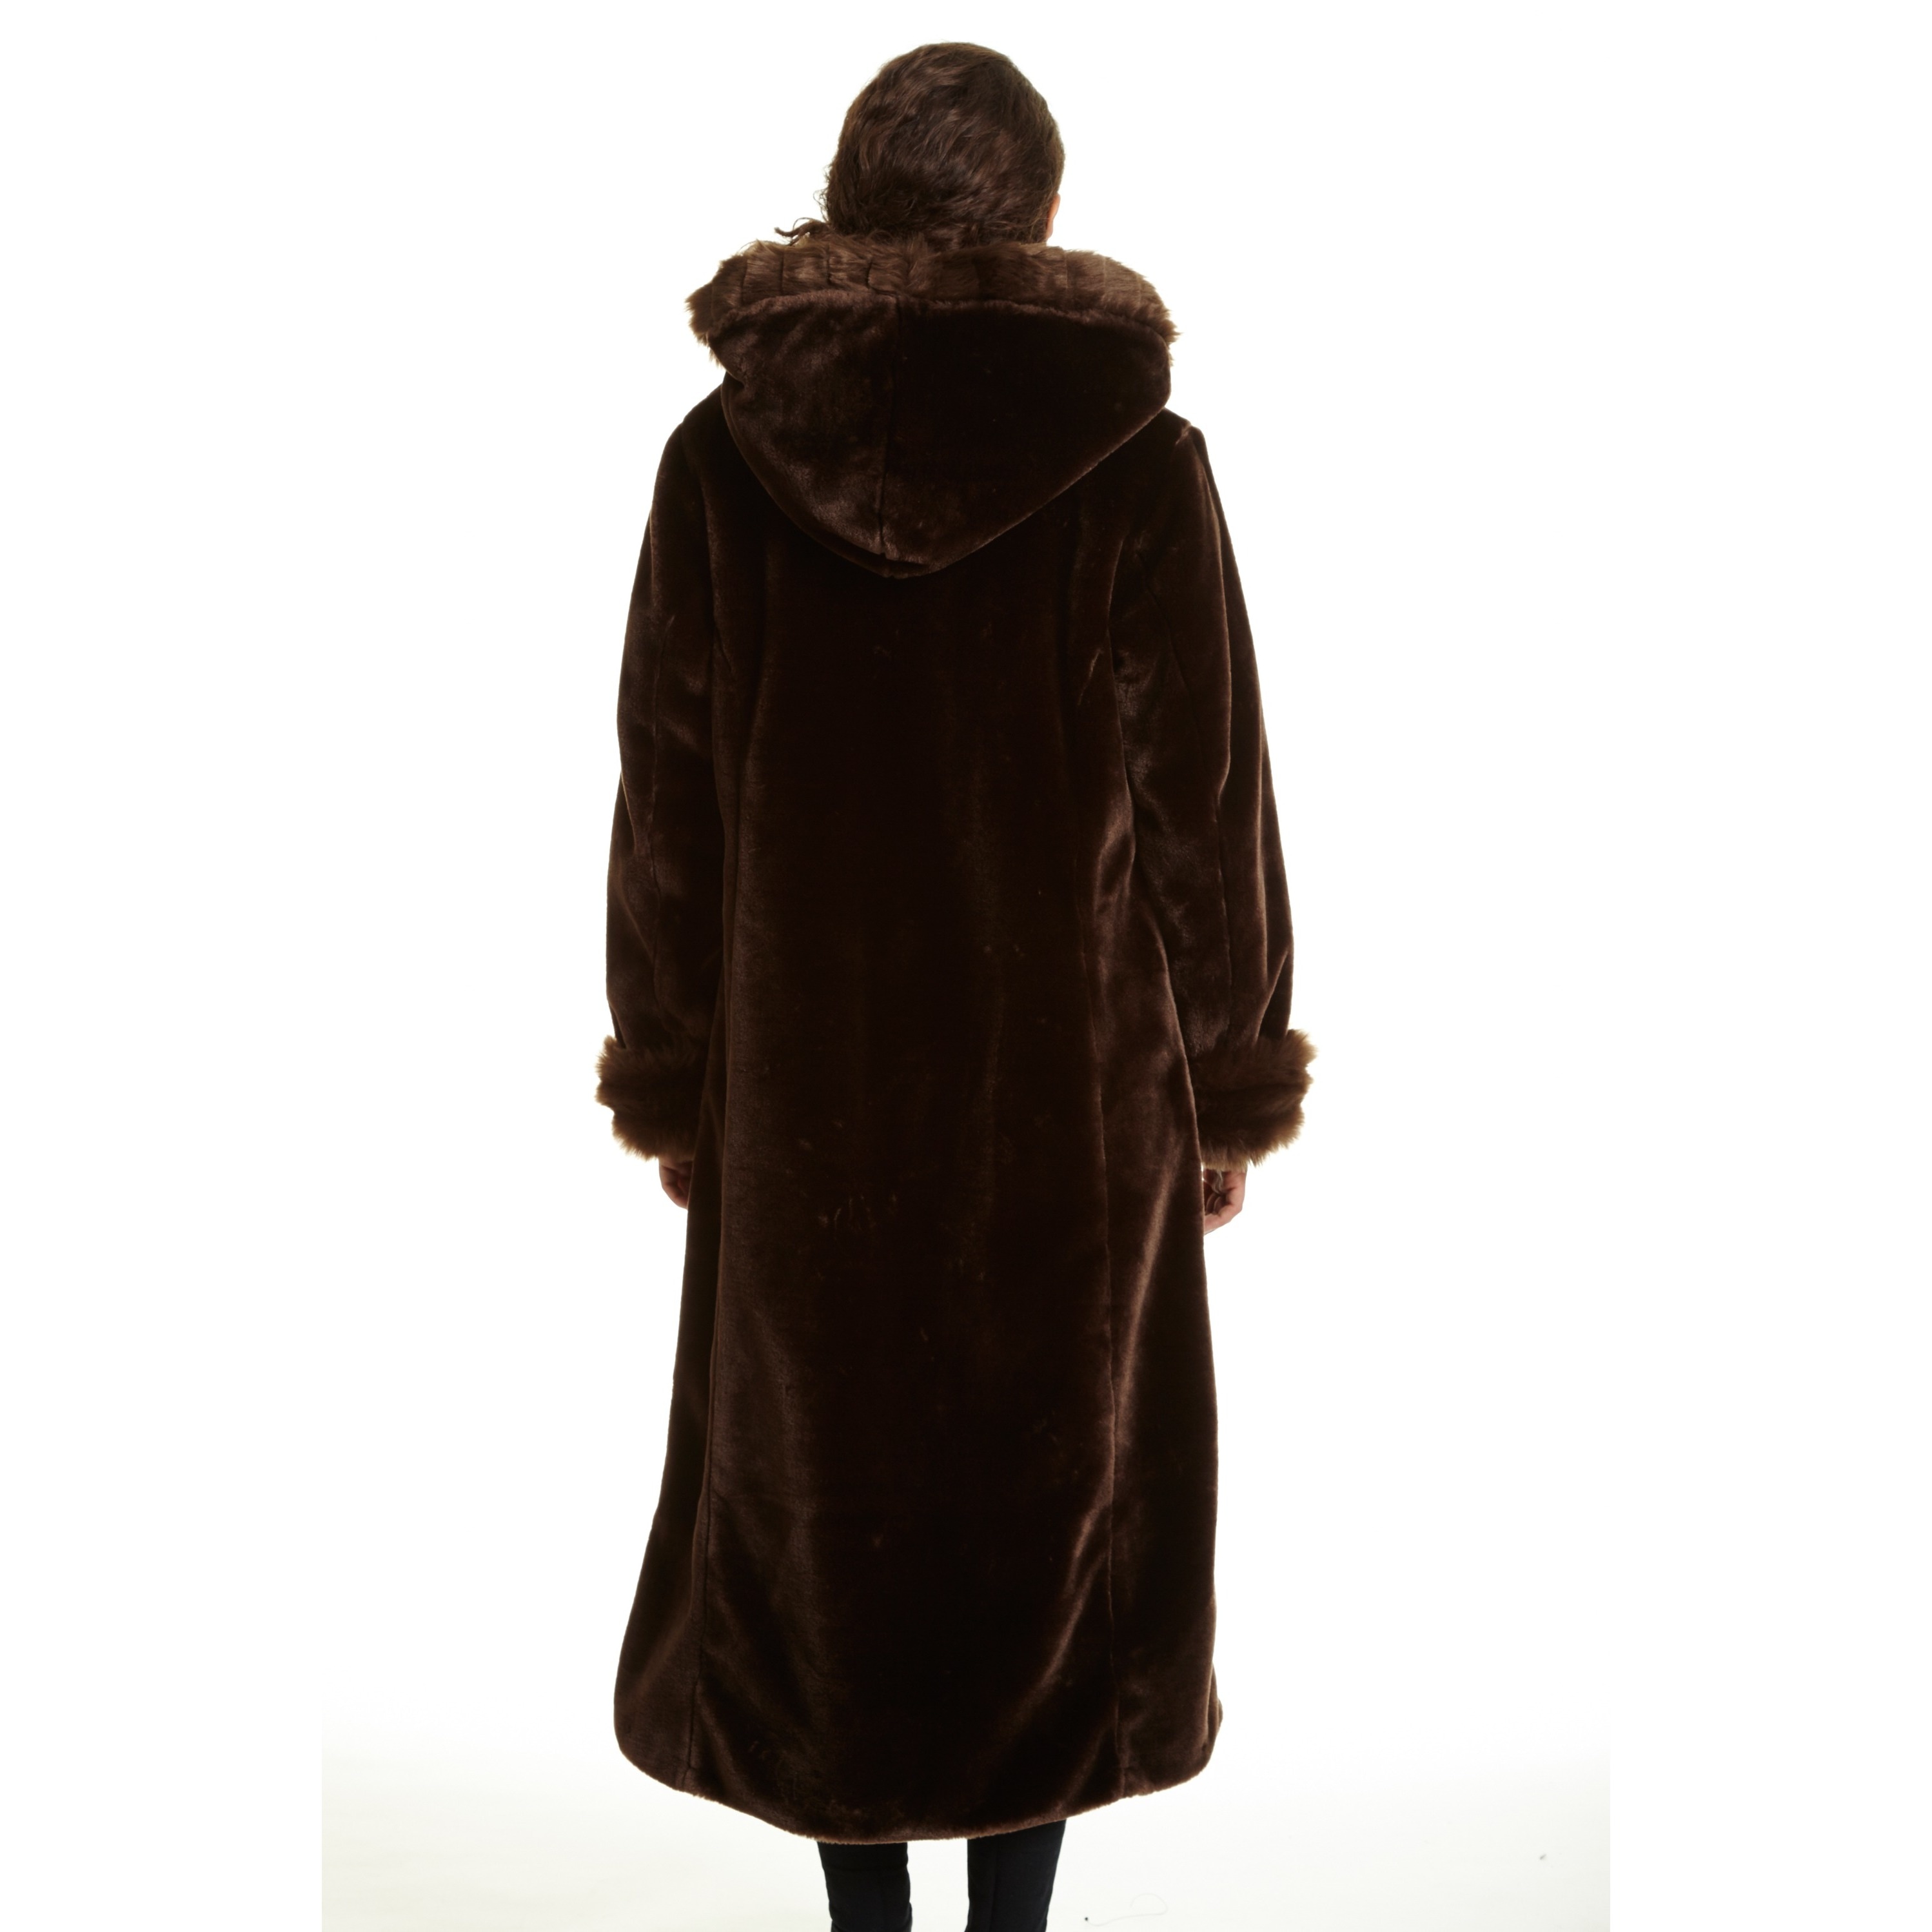 Shop Excelled Women S Faux Fur Hooded Full Length Coat Overstock